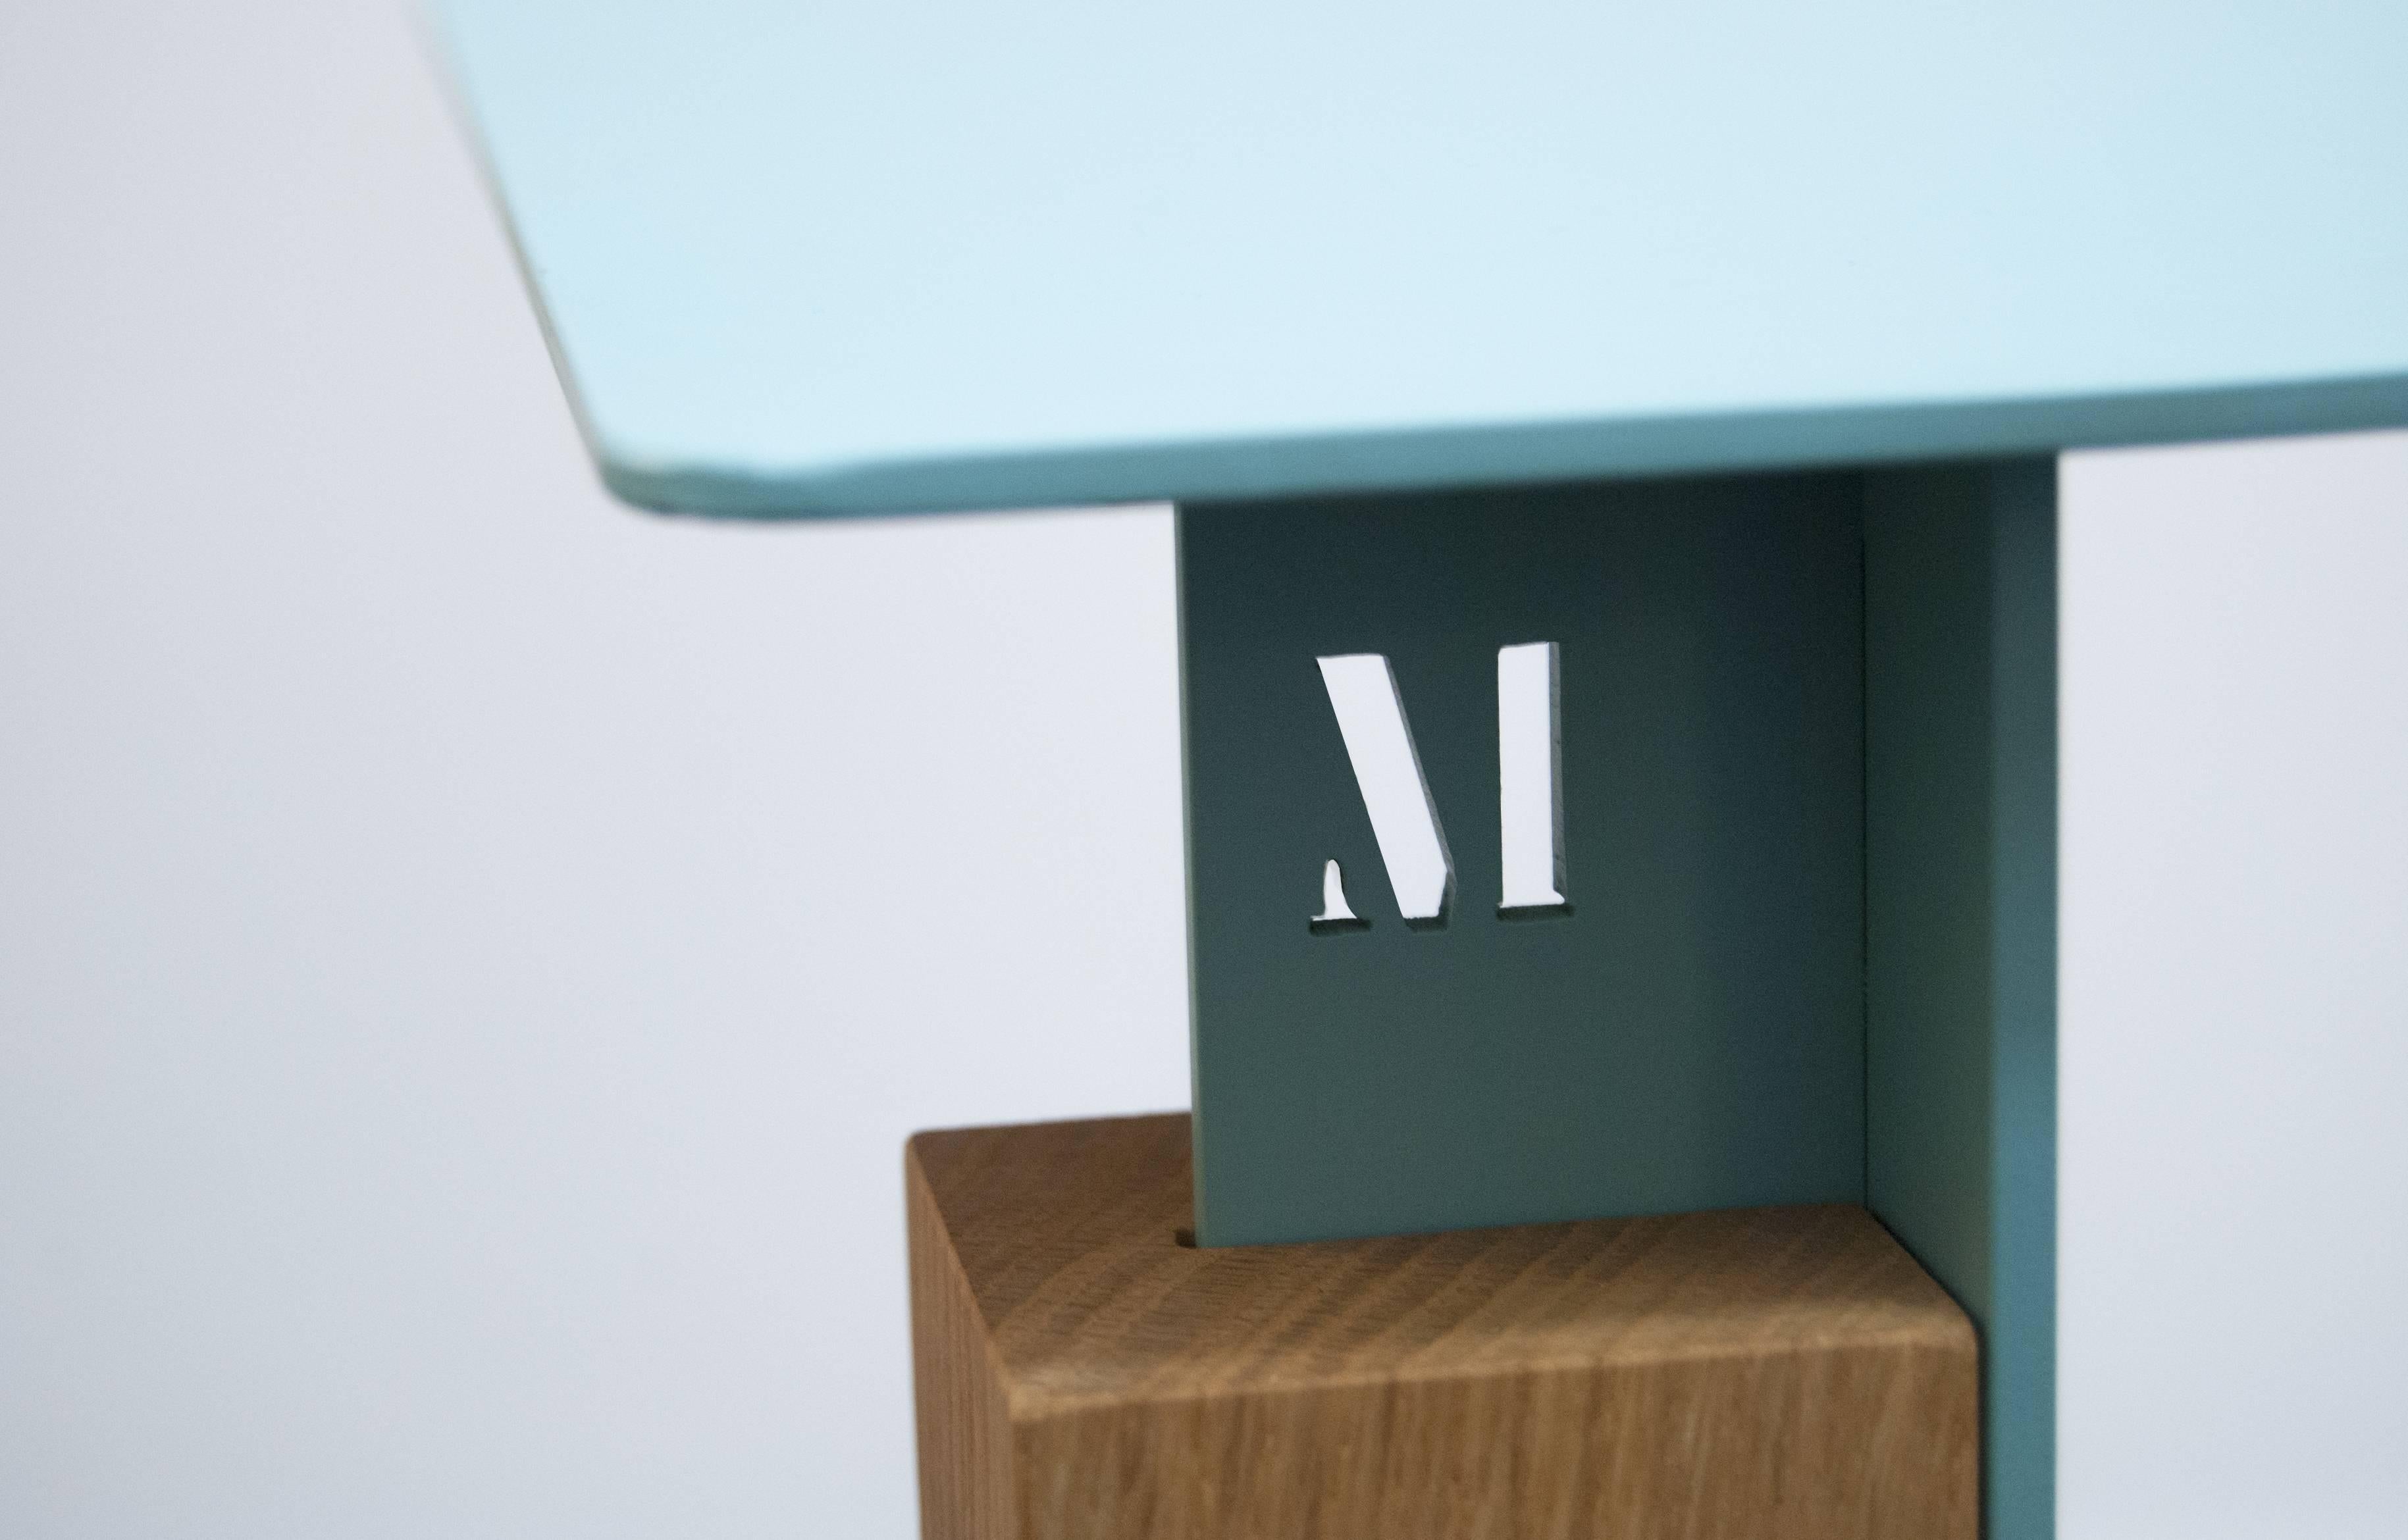 Inspired by metal structures for architecture, slide is a side table in metal and solid wood that combines design and craftsmanship. The metal parts compose the structure and the surface, while the wood is the connection between the
top and bottom